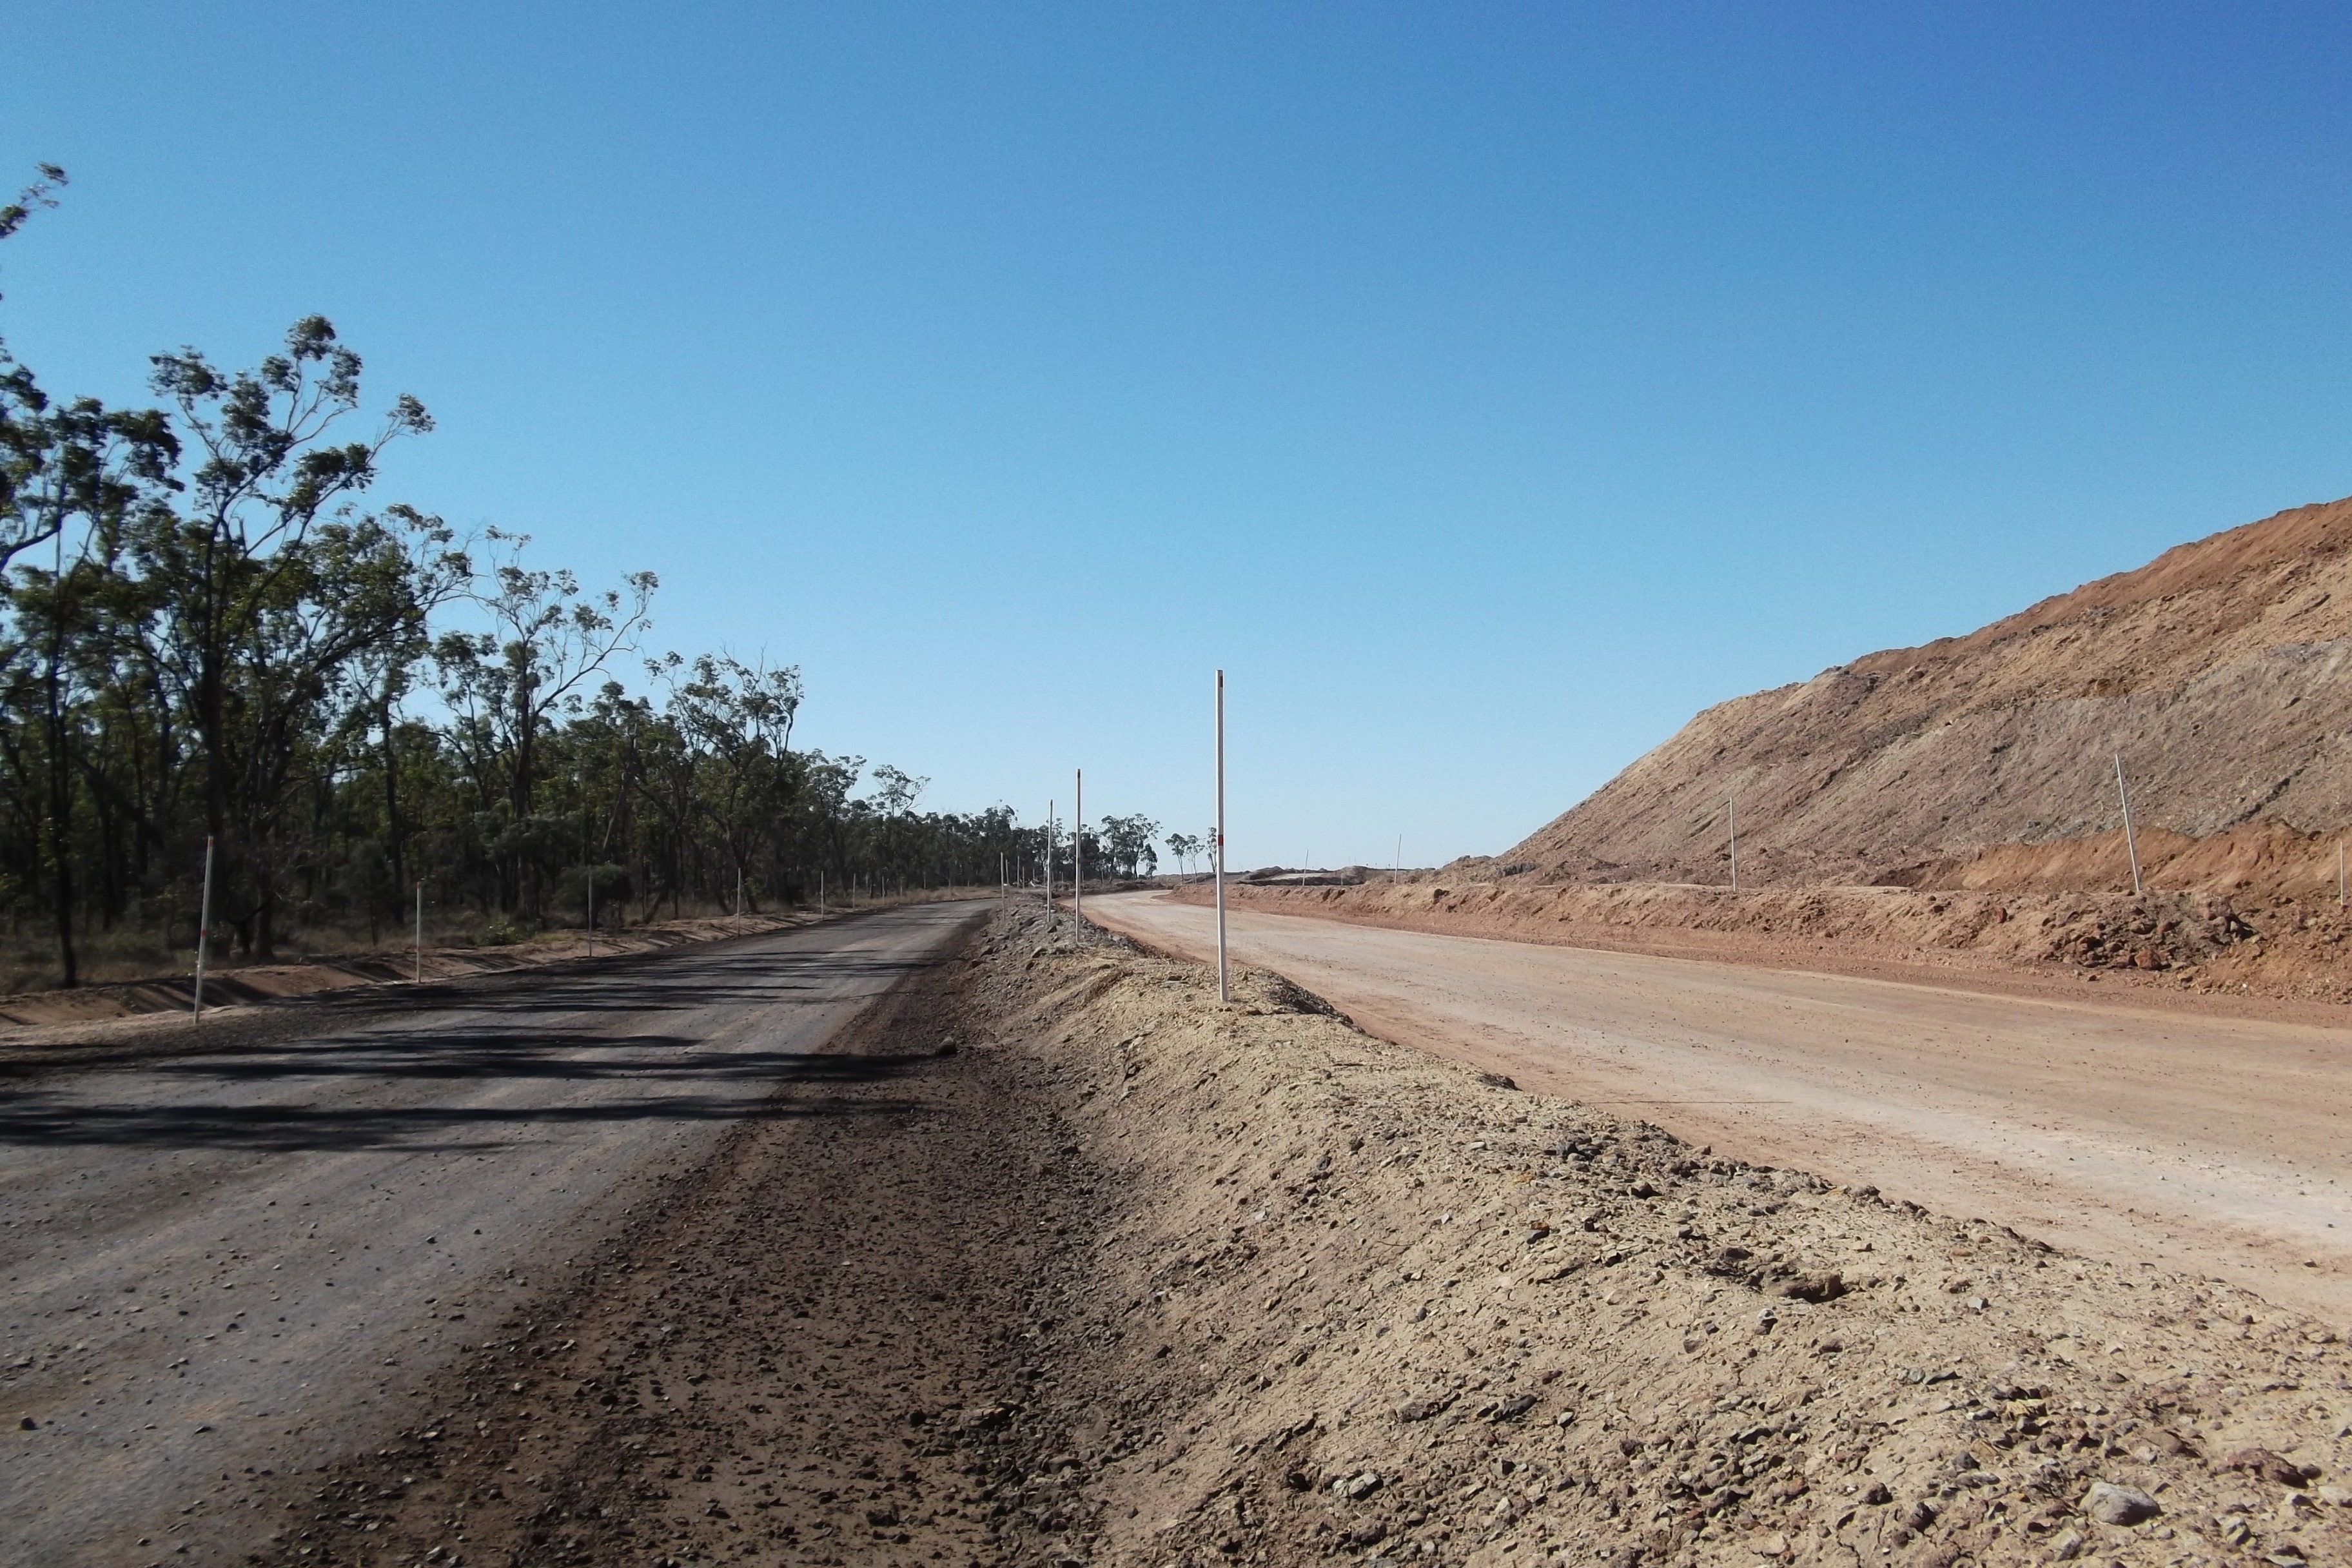 Light Vehicle Roads on Mining Sites: Safety Concerns and Dust Problems